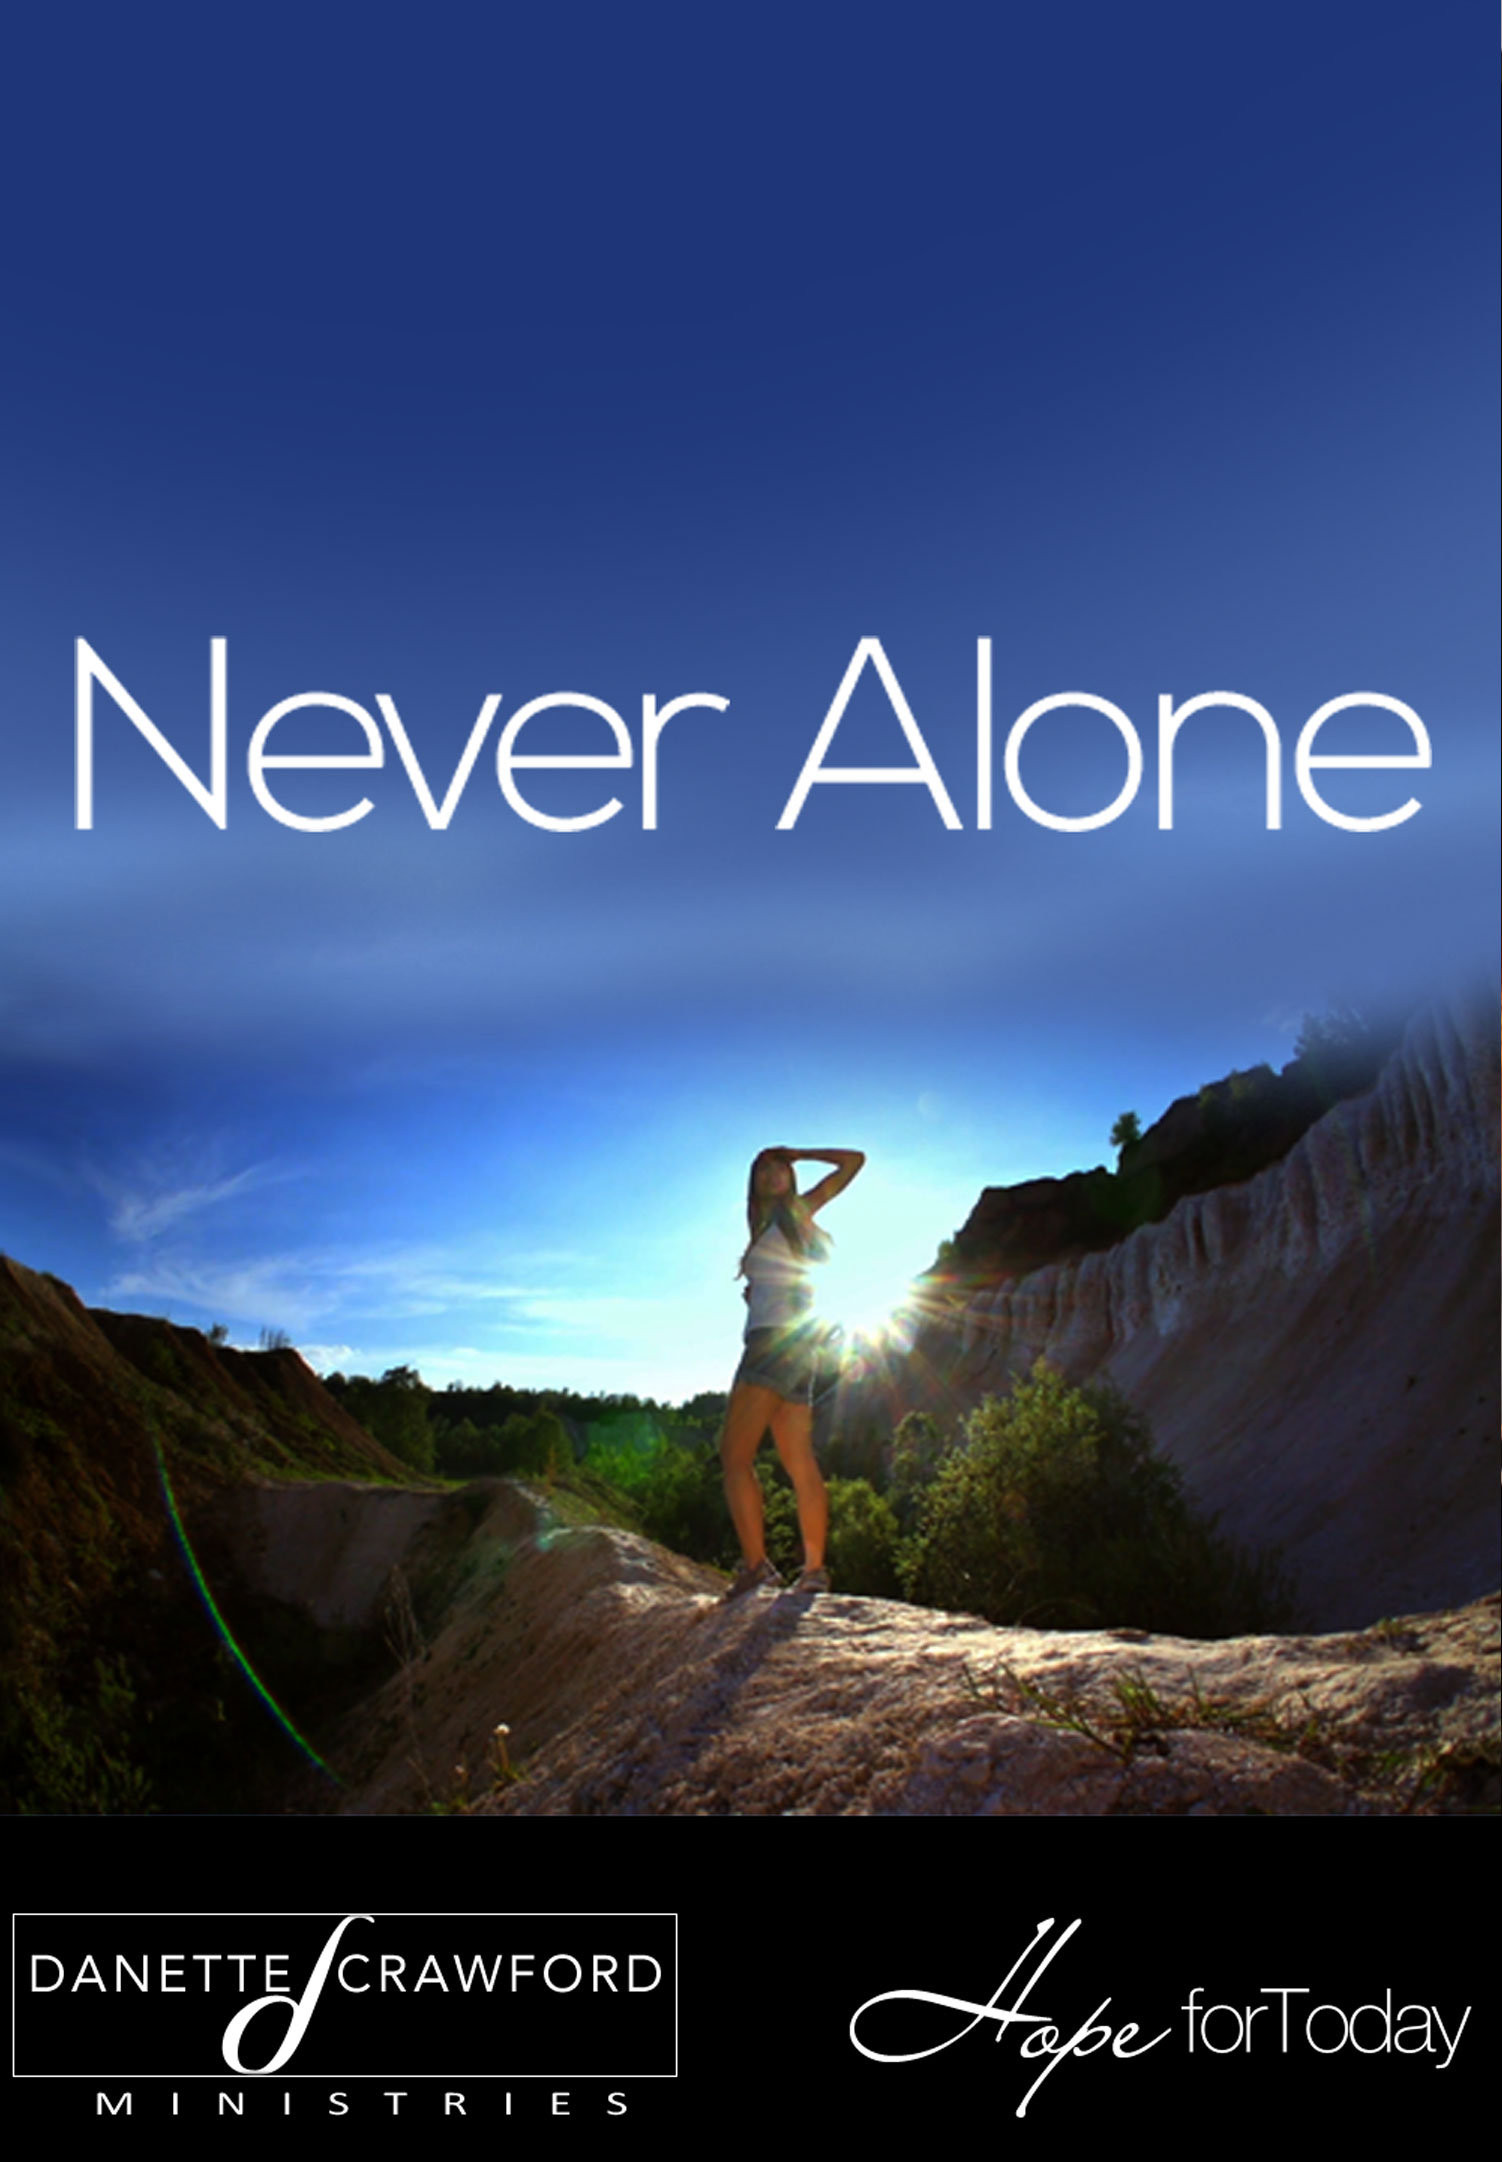 Newer be alone. Невер алоне. Never be Alone t &.